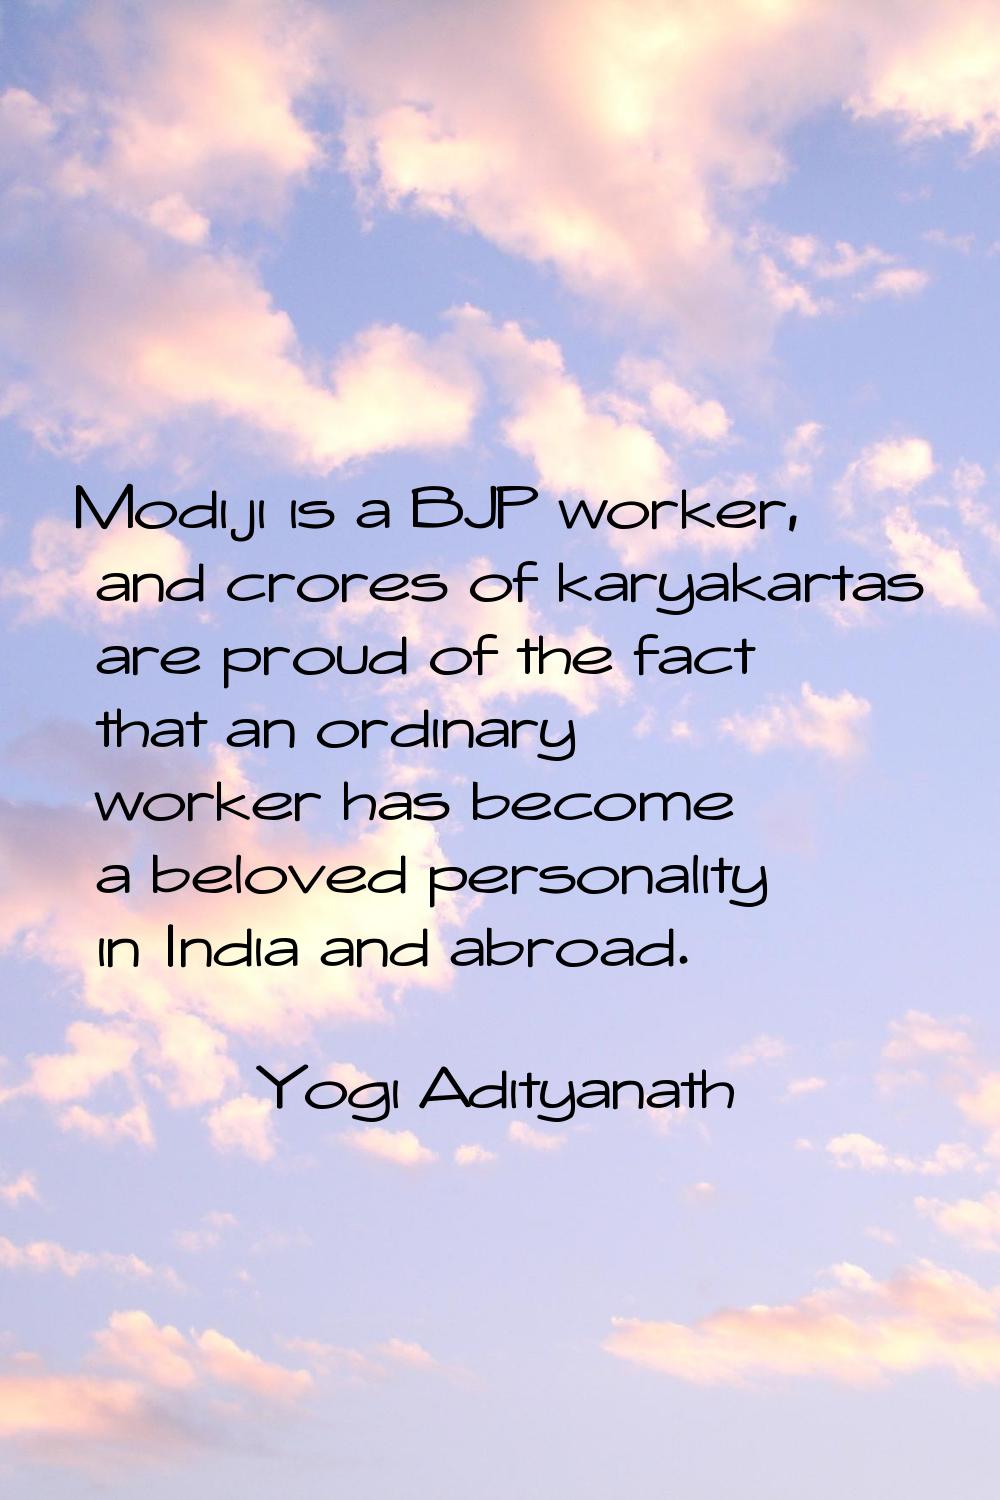 Modiji is a BJP worker, and crores of karyakartas are proud of the fact that an ordinary worker has